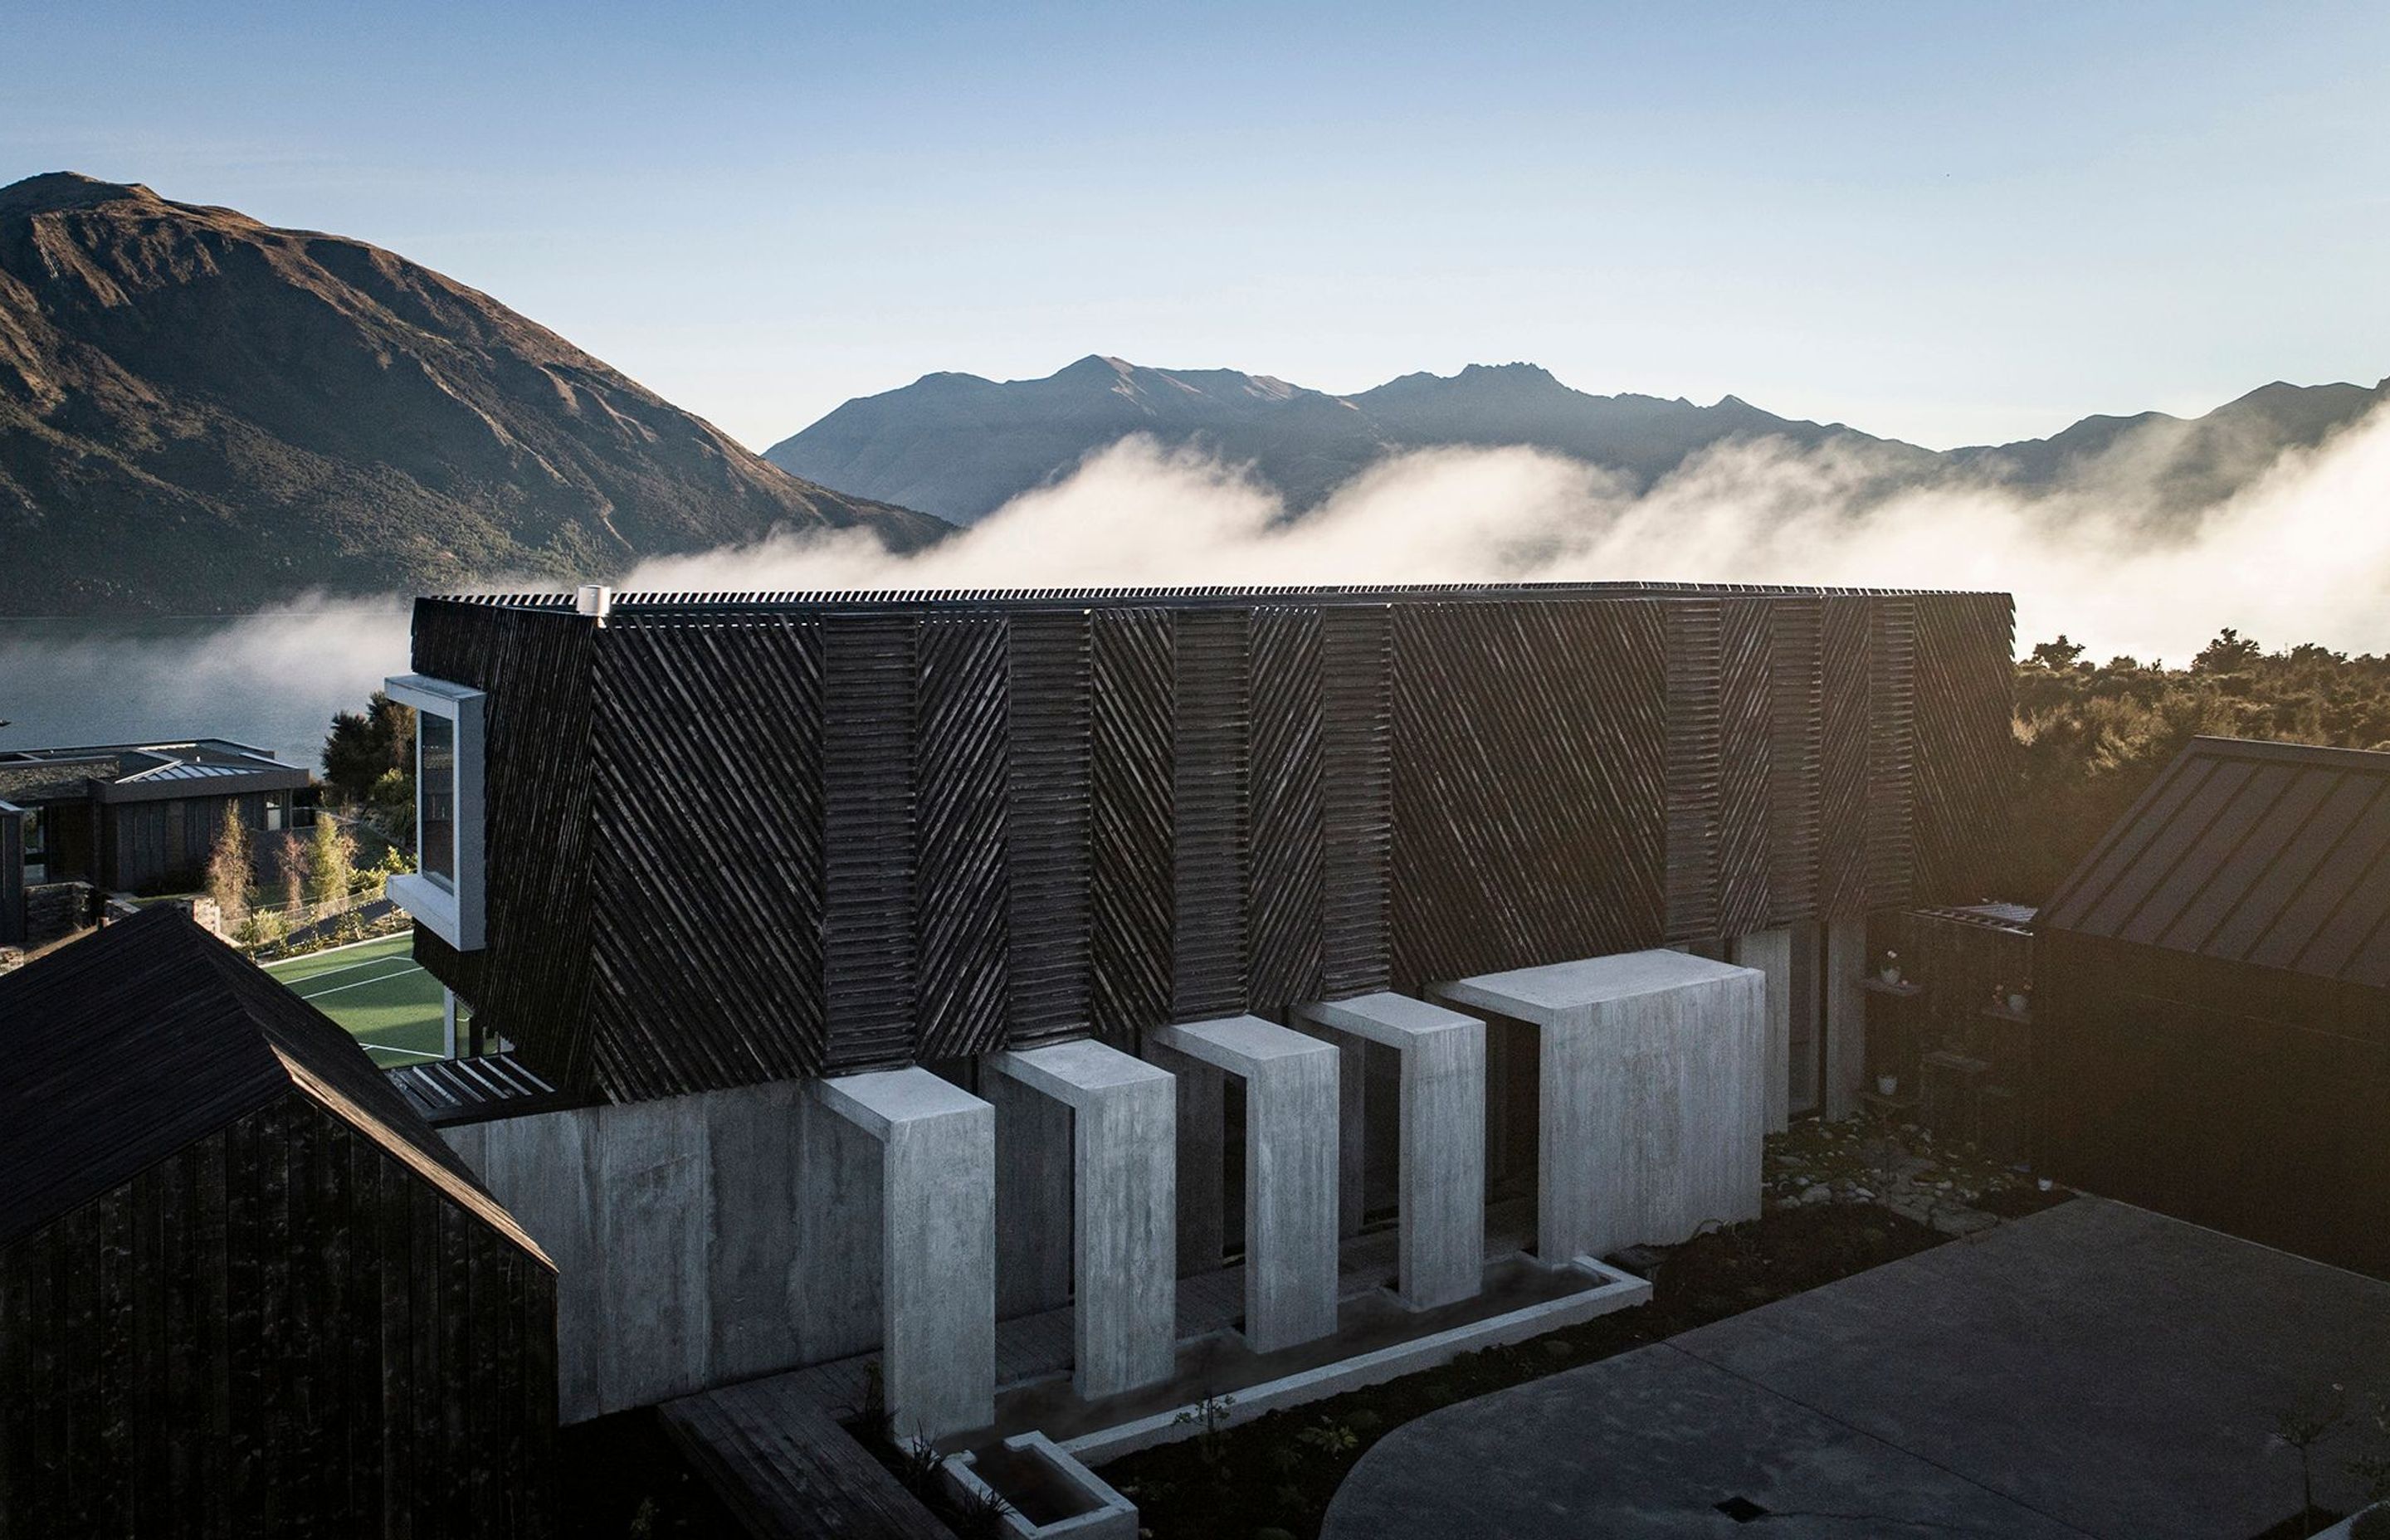 Low-lying cloud over the lake creates a dramatic backdrop to Mount Gold house. In the foreground, the exterior concrete corridor forms a procession to the entry of the house.